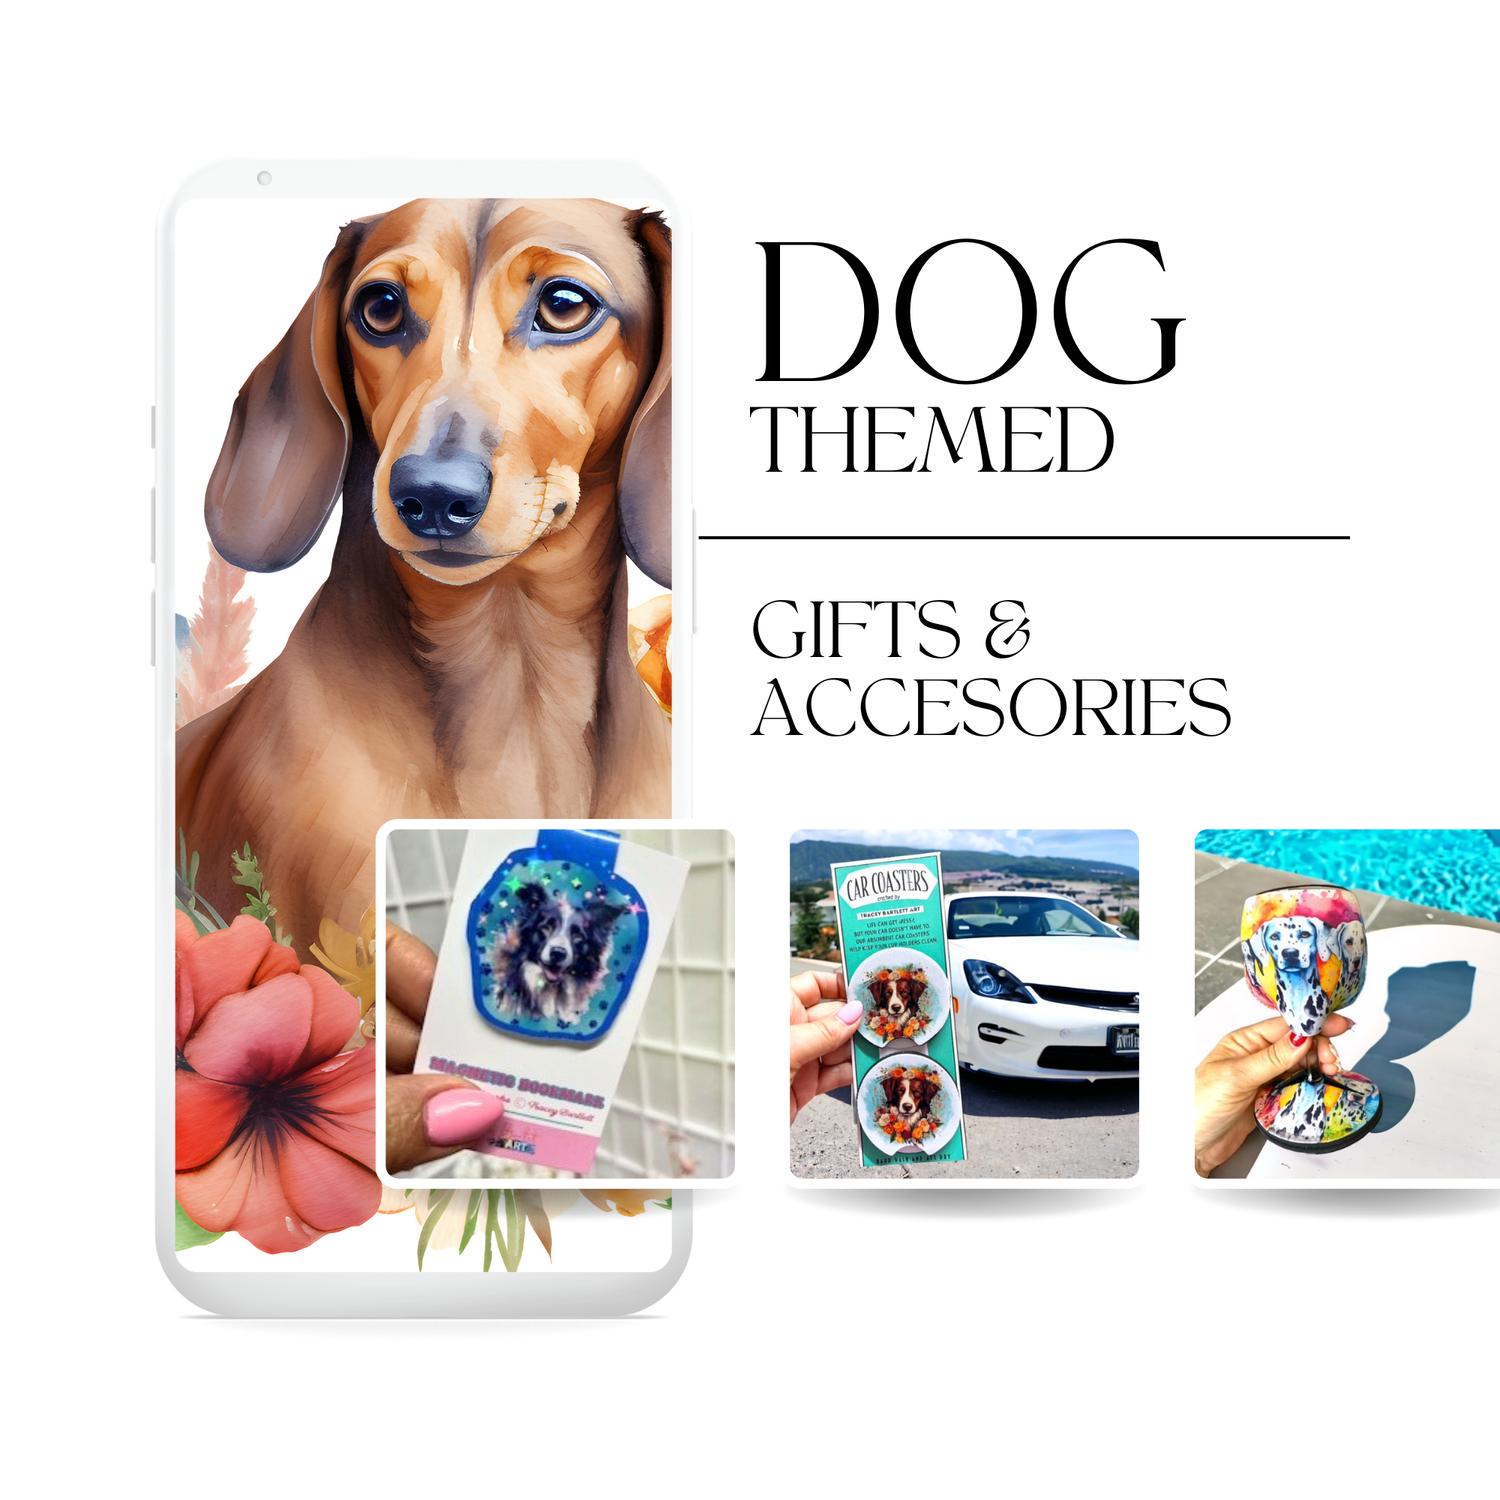 Dog Themed Gifts & Accessories